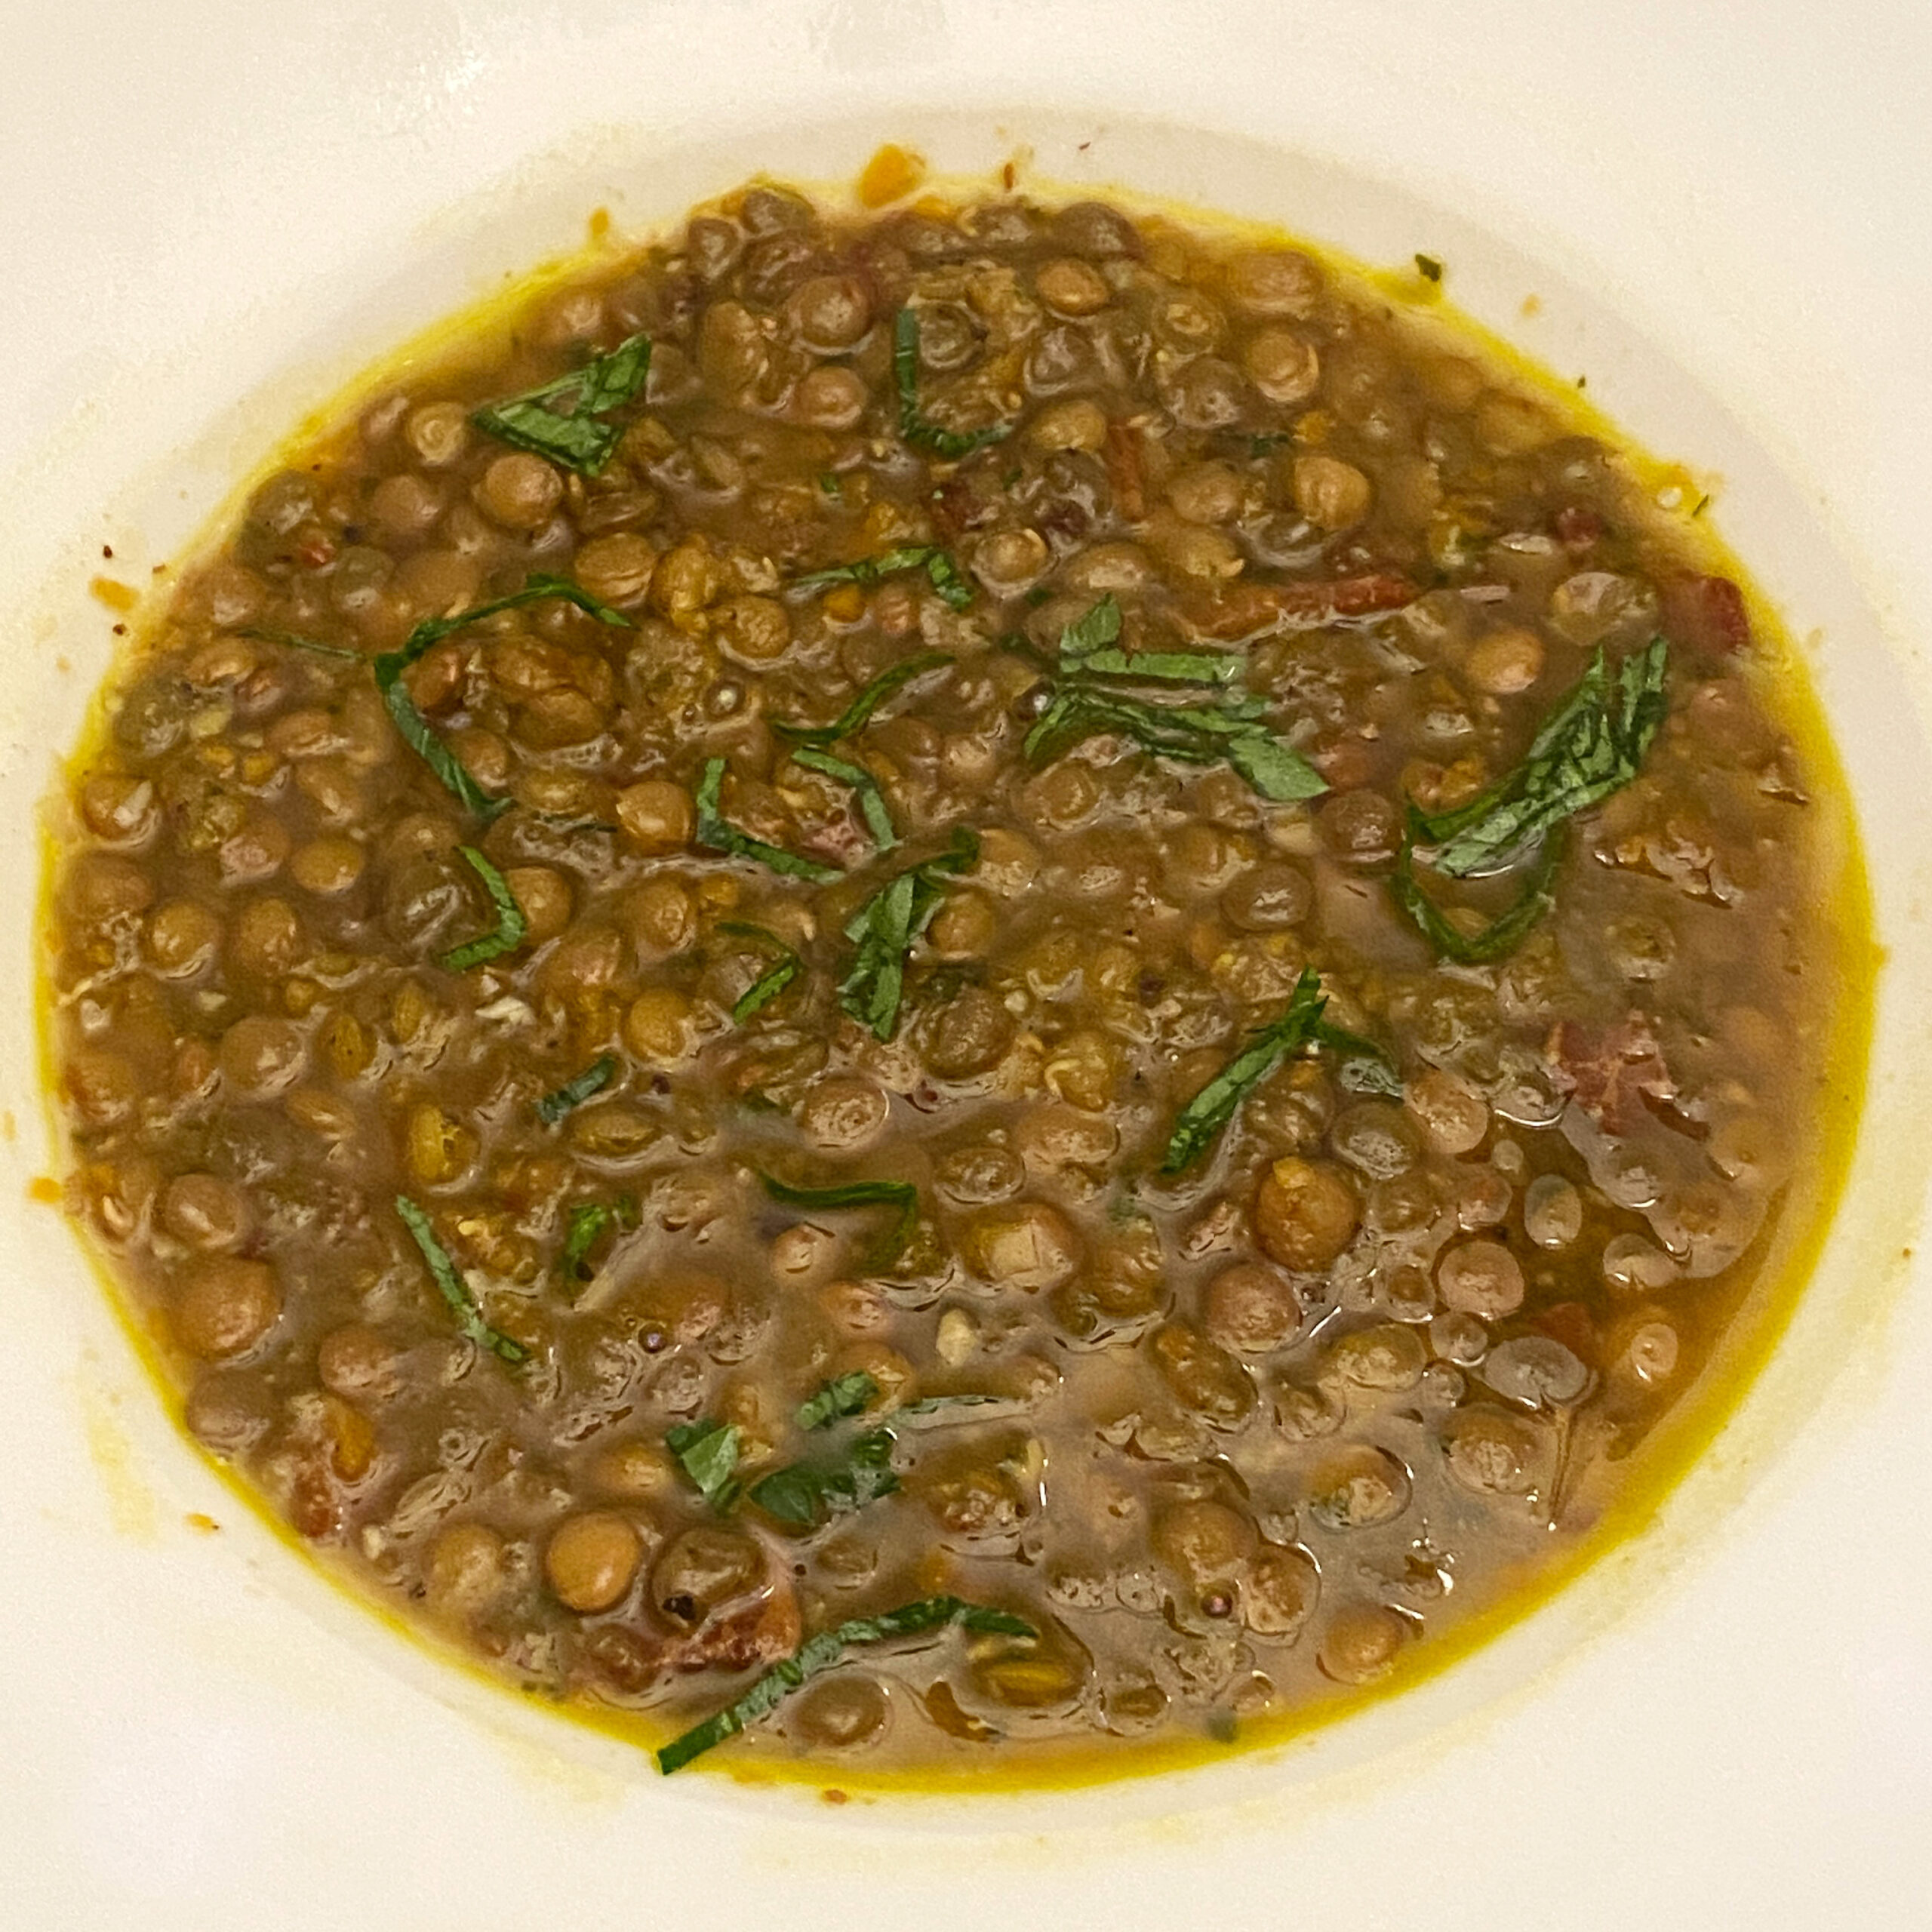 New Year’s Day Lentils